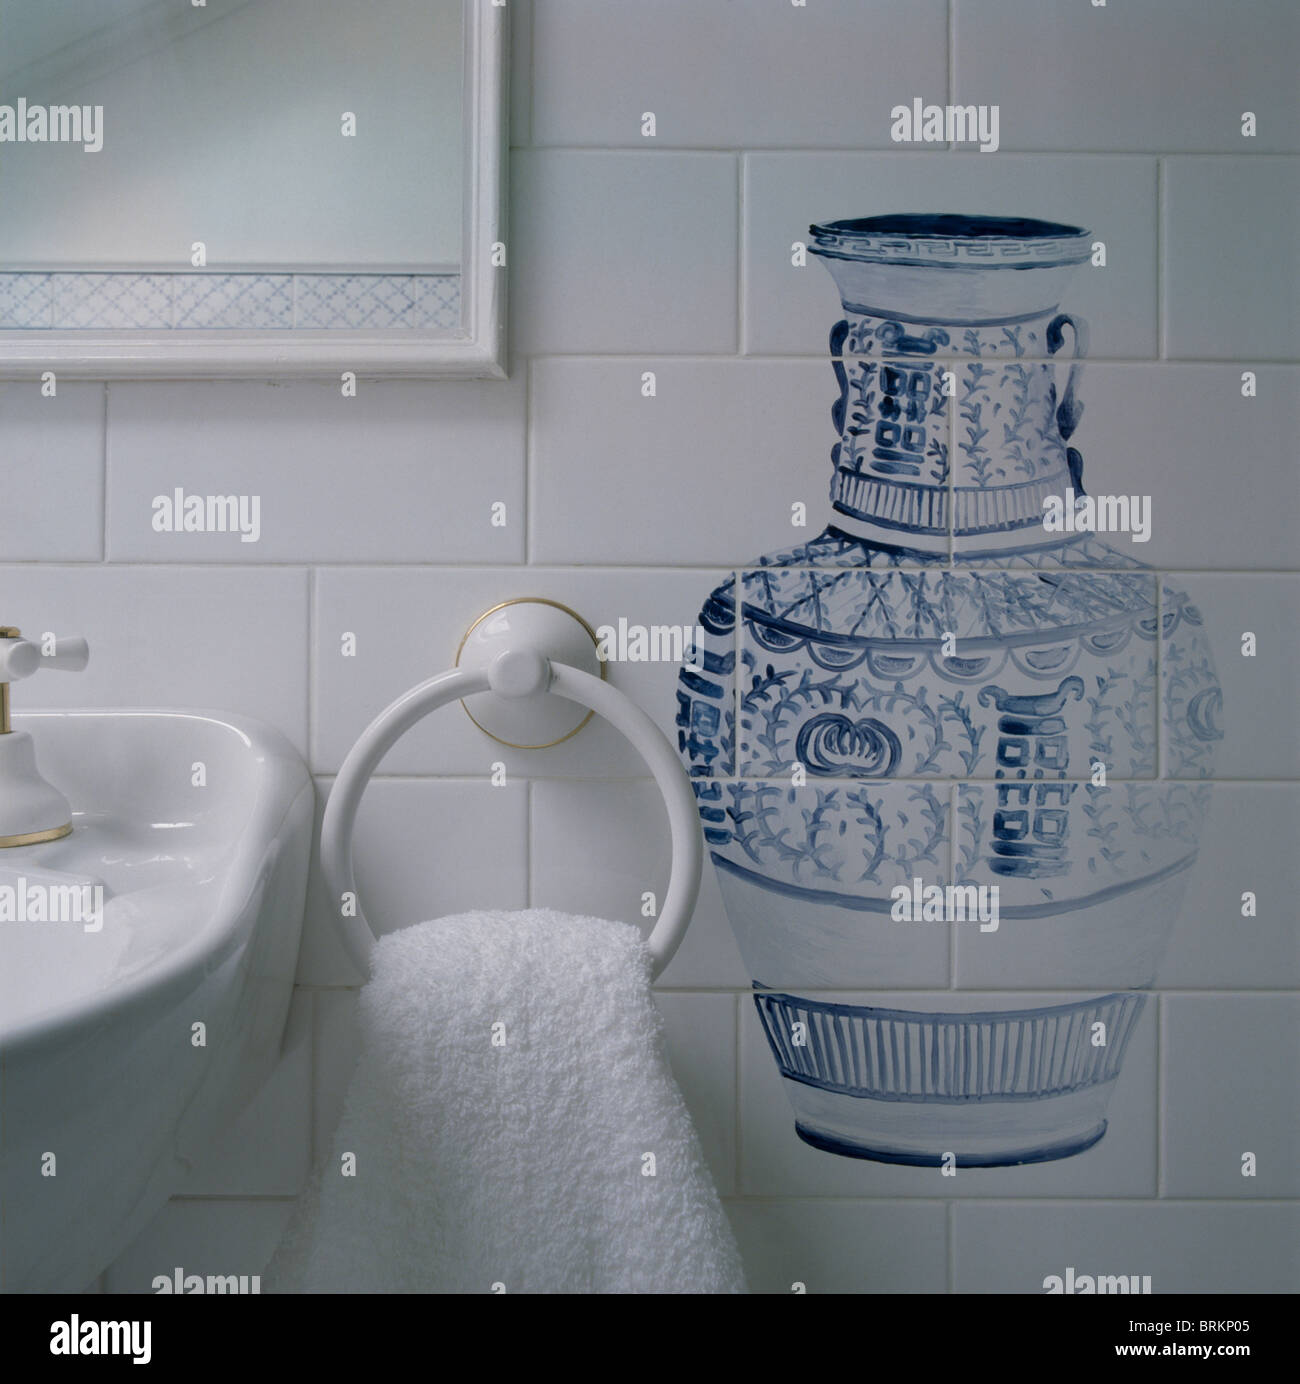 Close-up of blue+white trompe-l'oeil vase hand-painted onto white tiled bathroom wall Stock Photo